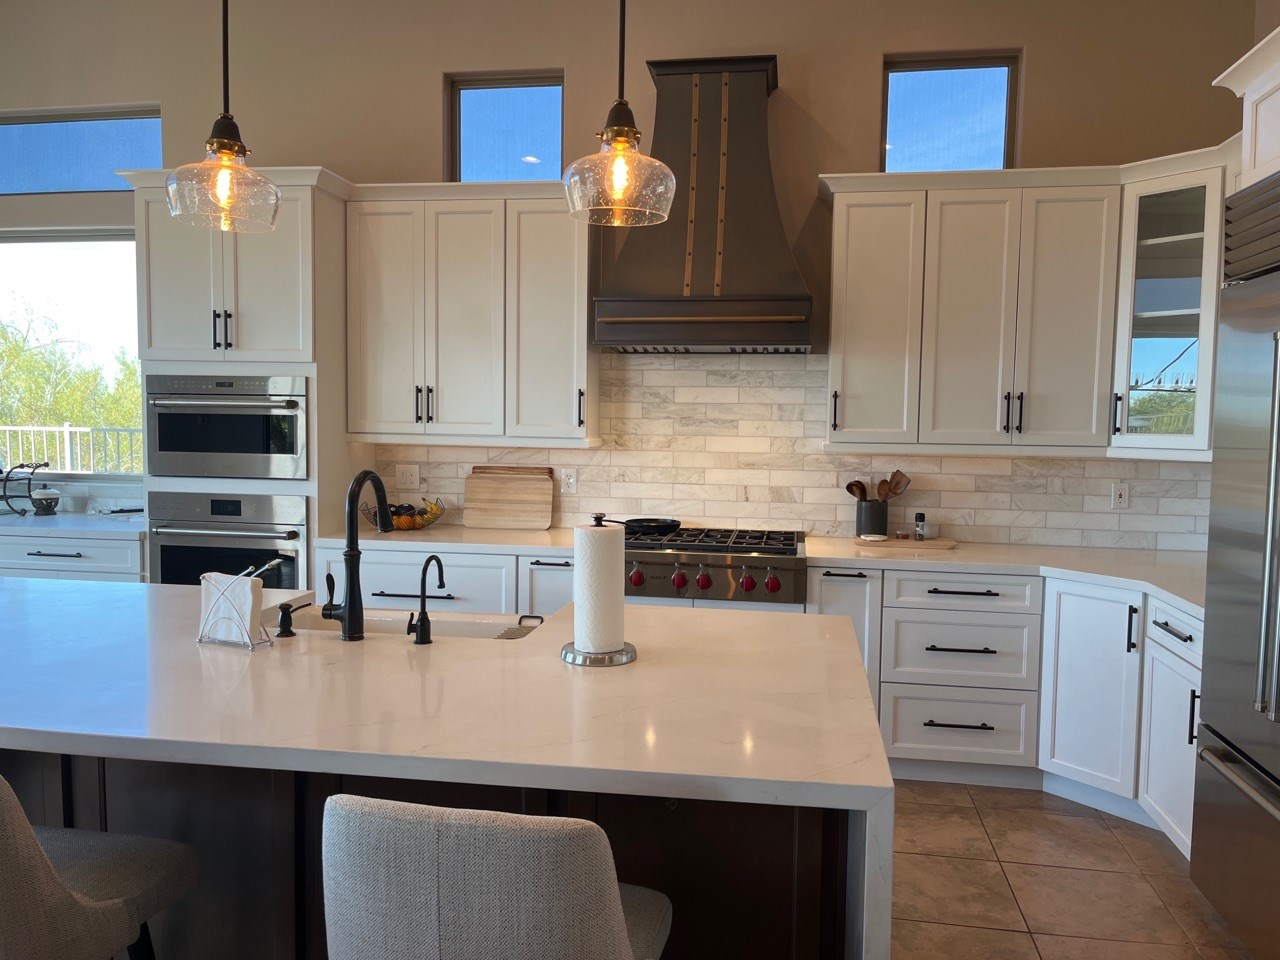 A modern kitchen design with a farmhouse sink, rustic-inspired elements, white kitchen cabinets and countertops, white tile backsplash with range hood